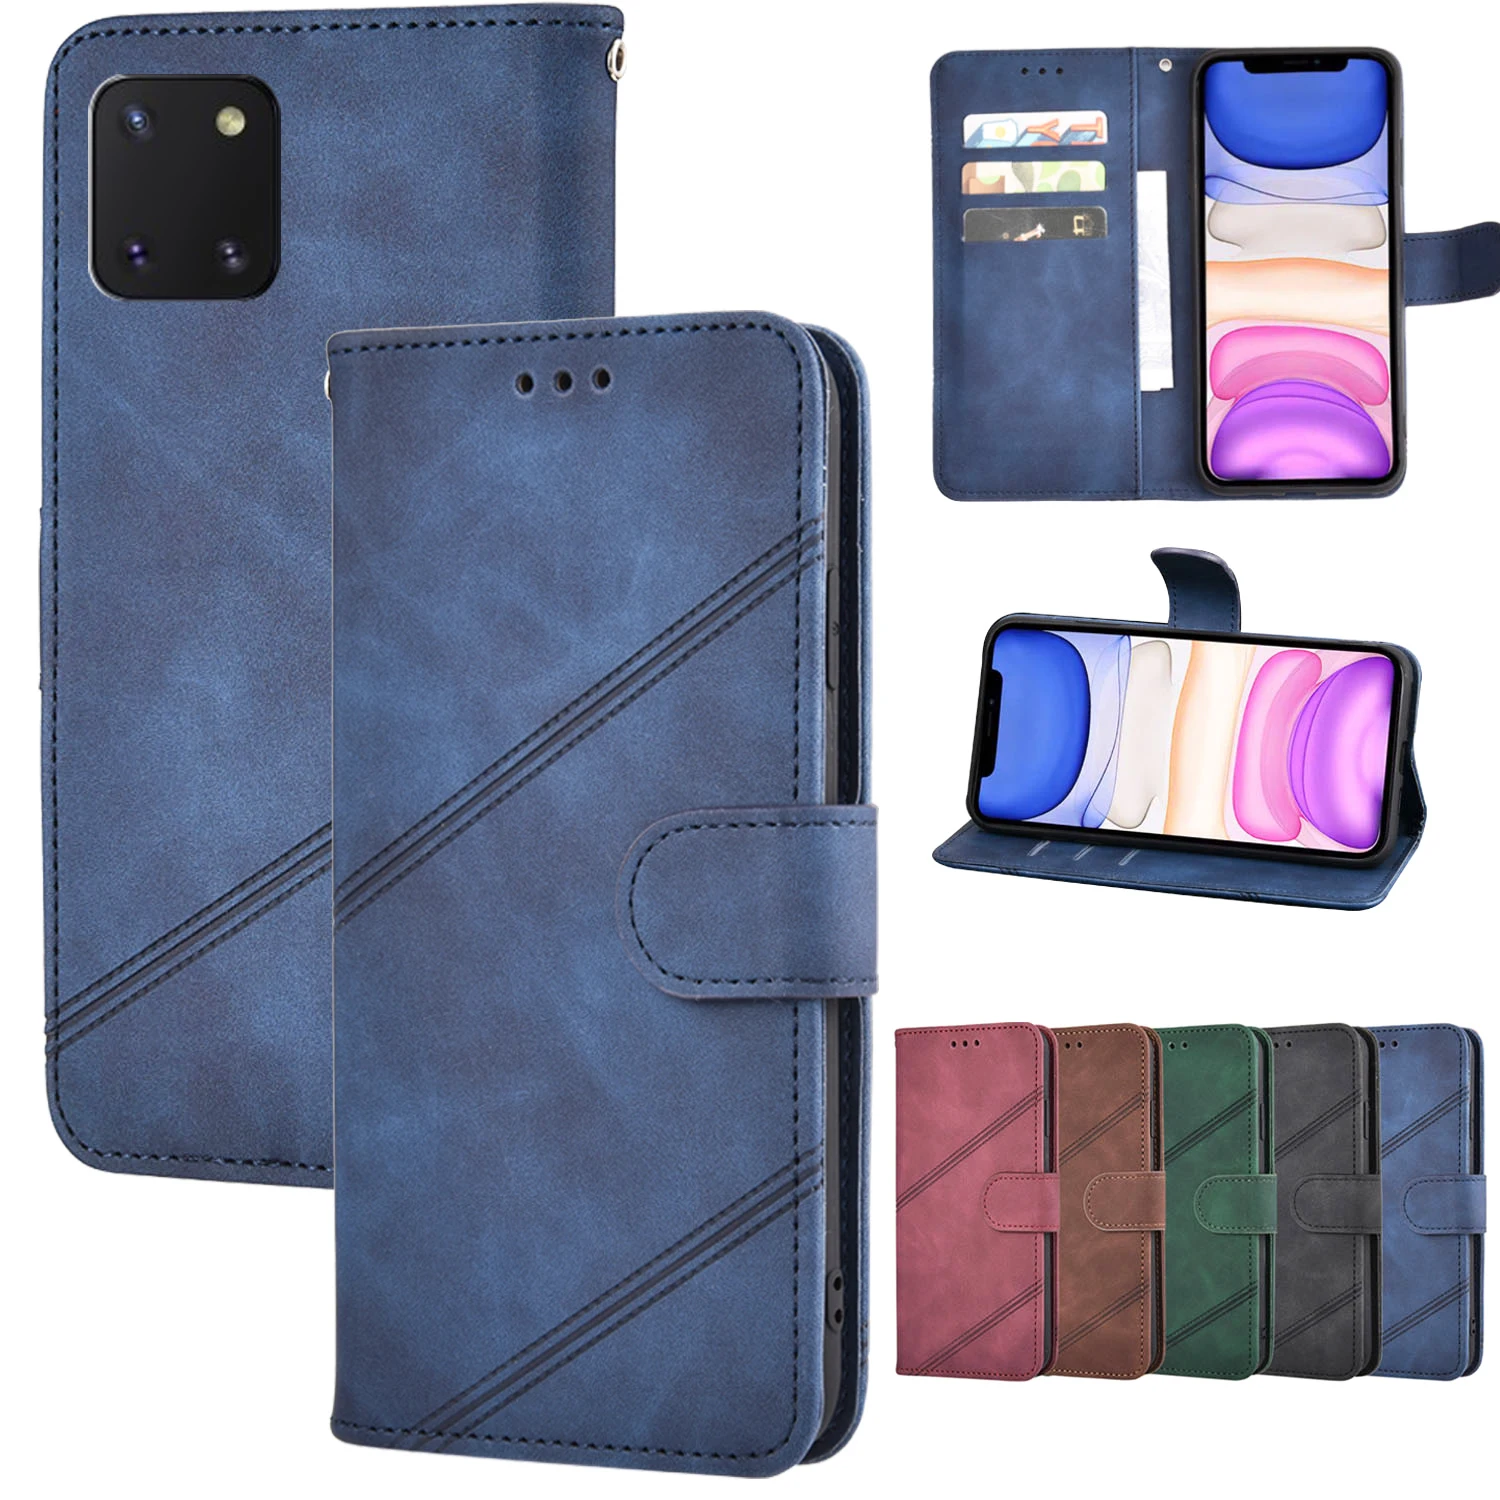 

Retro Magnetic Leather Case For Huawei Honor 4C Pro Y6 Pro Enjoy 5 Holly 2+ Honor 5X Play Wallet Coque Bag